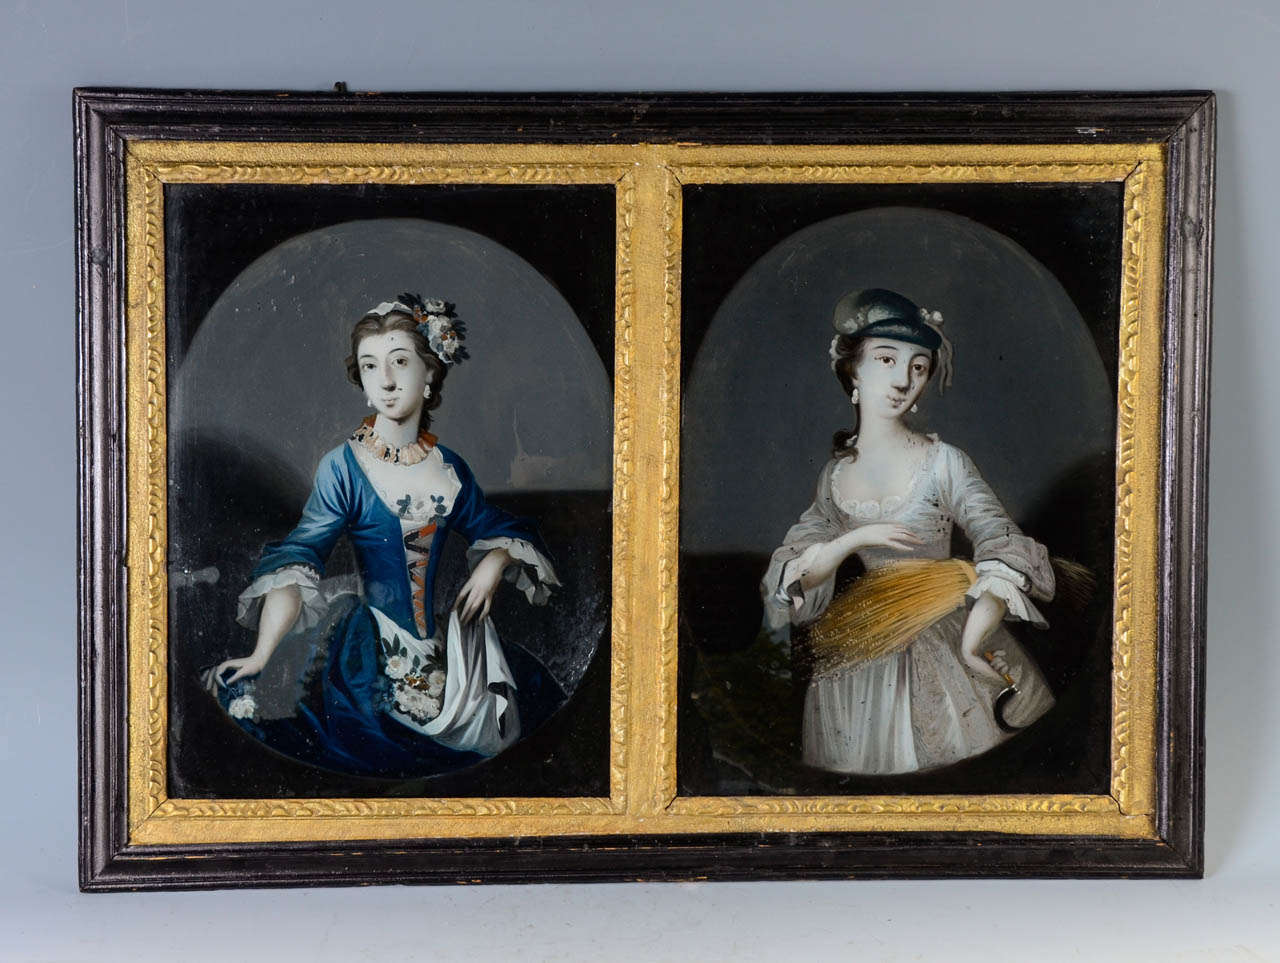 Fixed under glass of 2 magnificent young women (18th century) representing the spring and the summer.The spring with the hatching of flowers and summer with forgery and the wheat cut .Golden and carved fine frame.